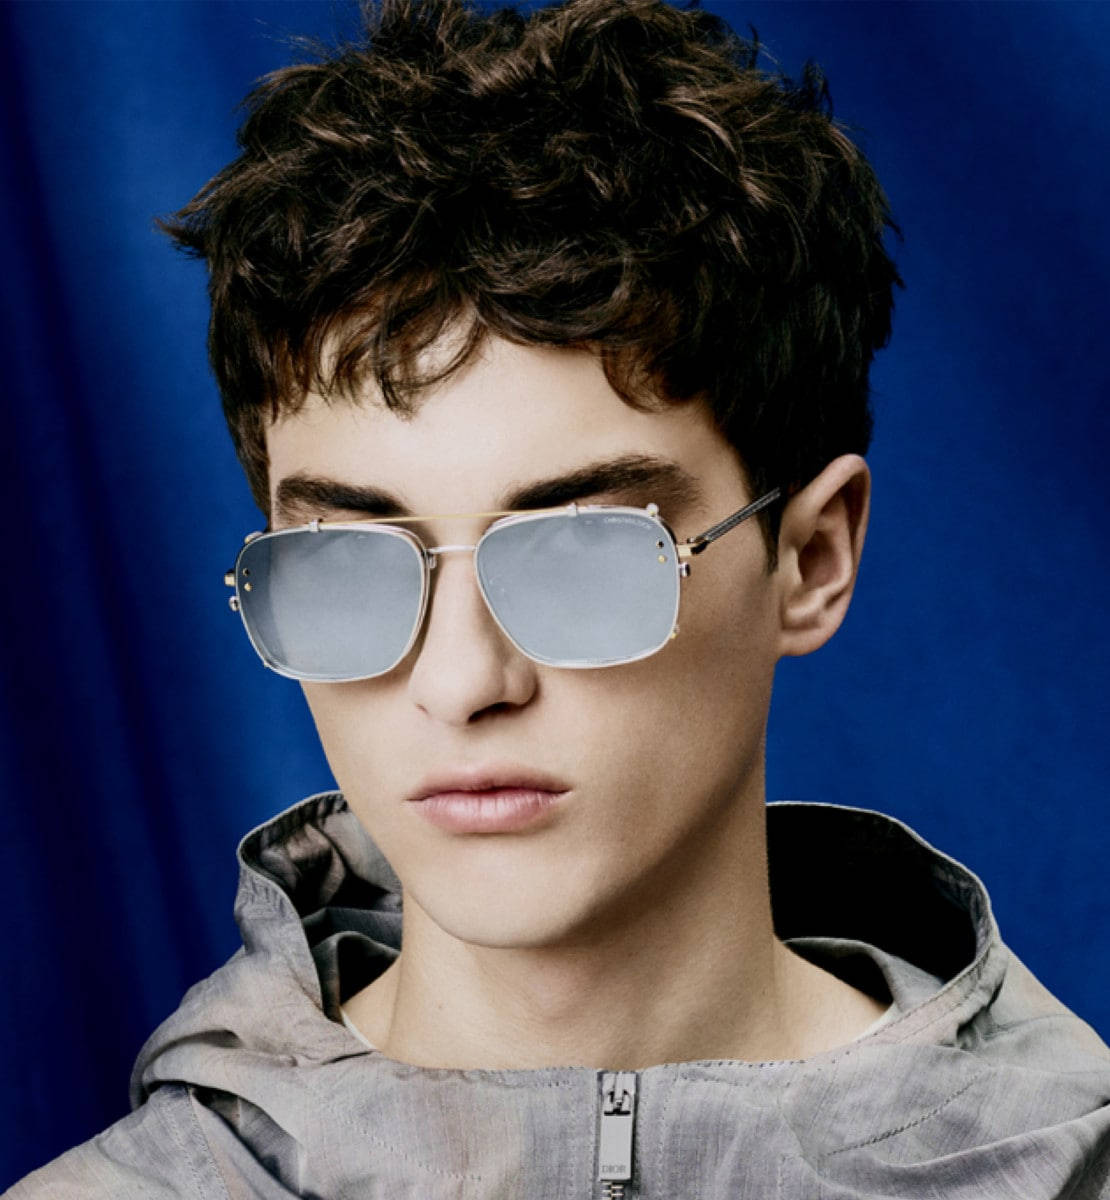 Exquisite Silver Sunglasses By Christian Dior